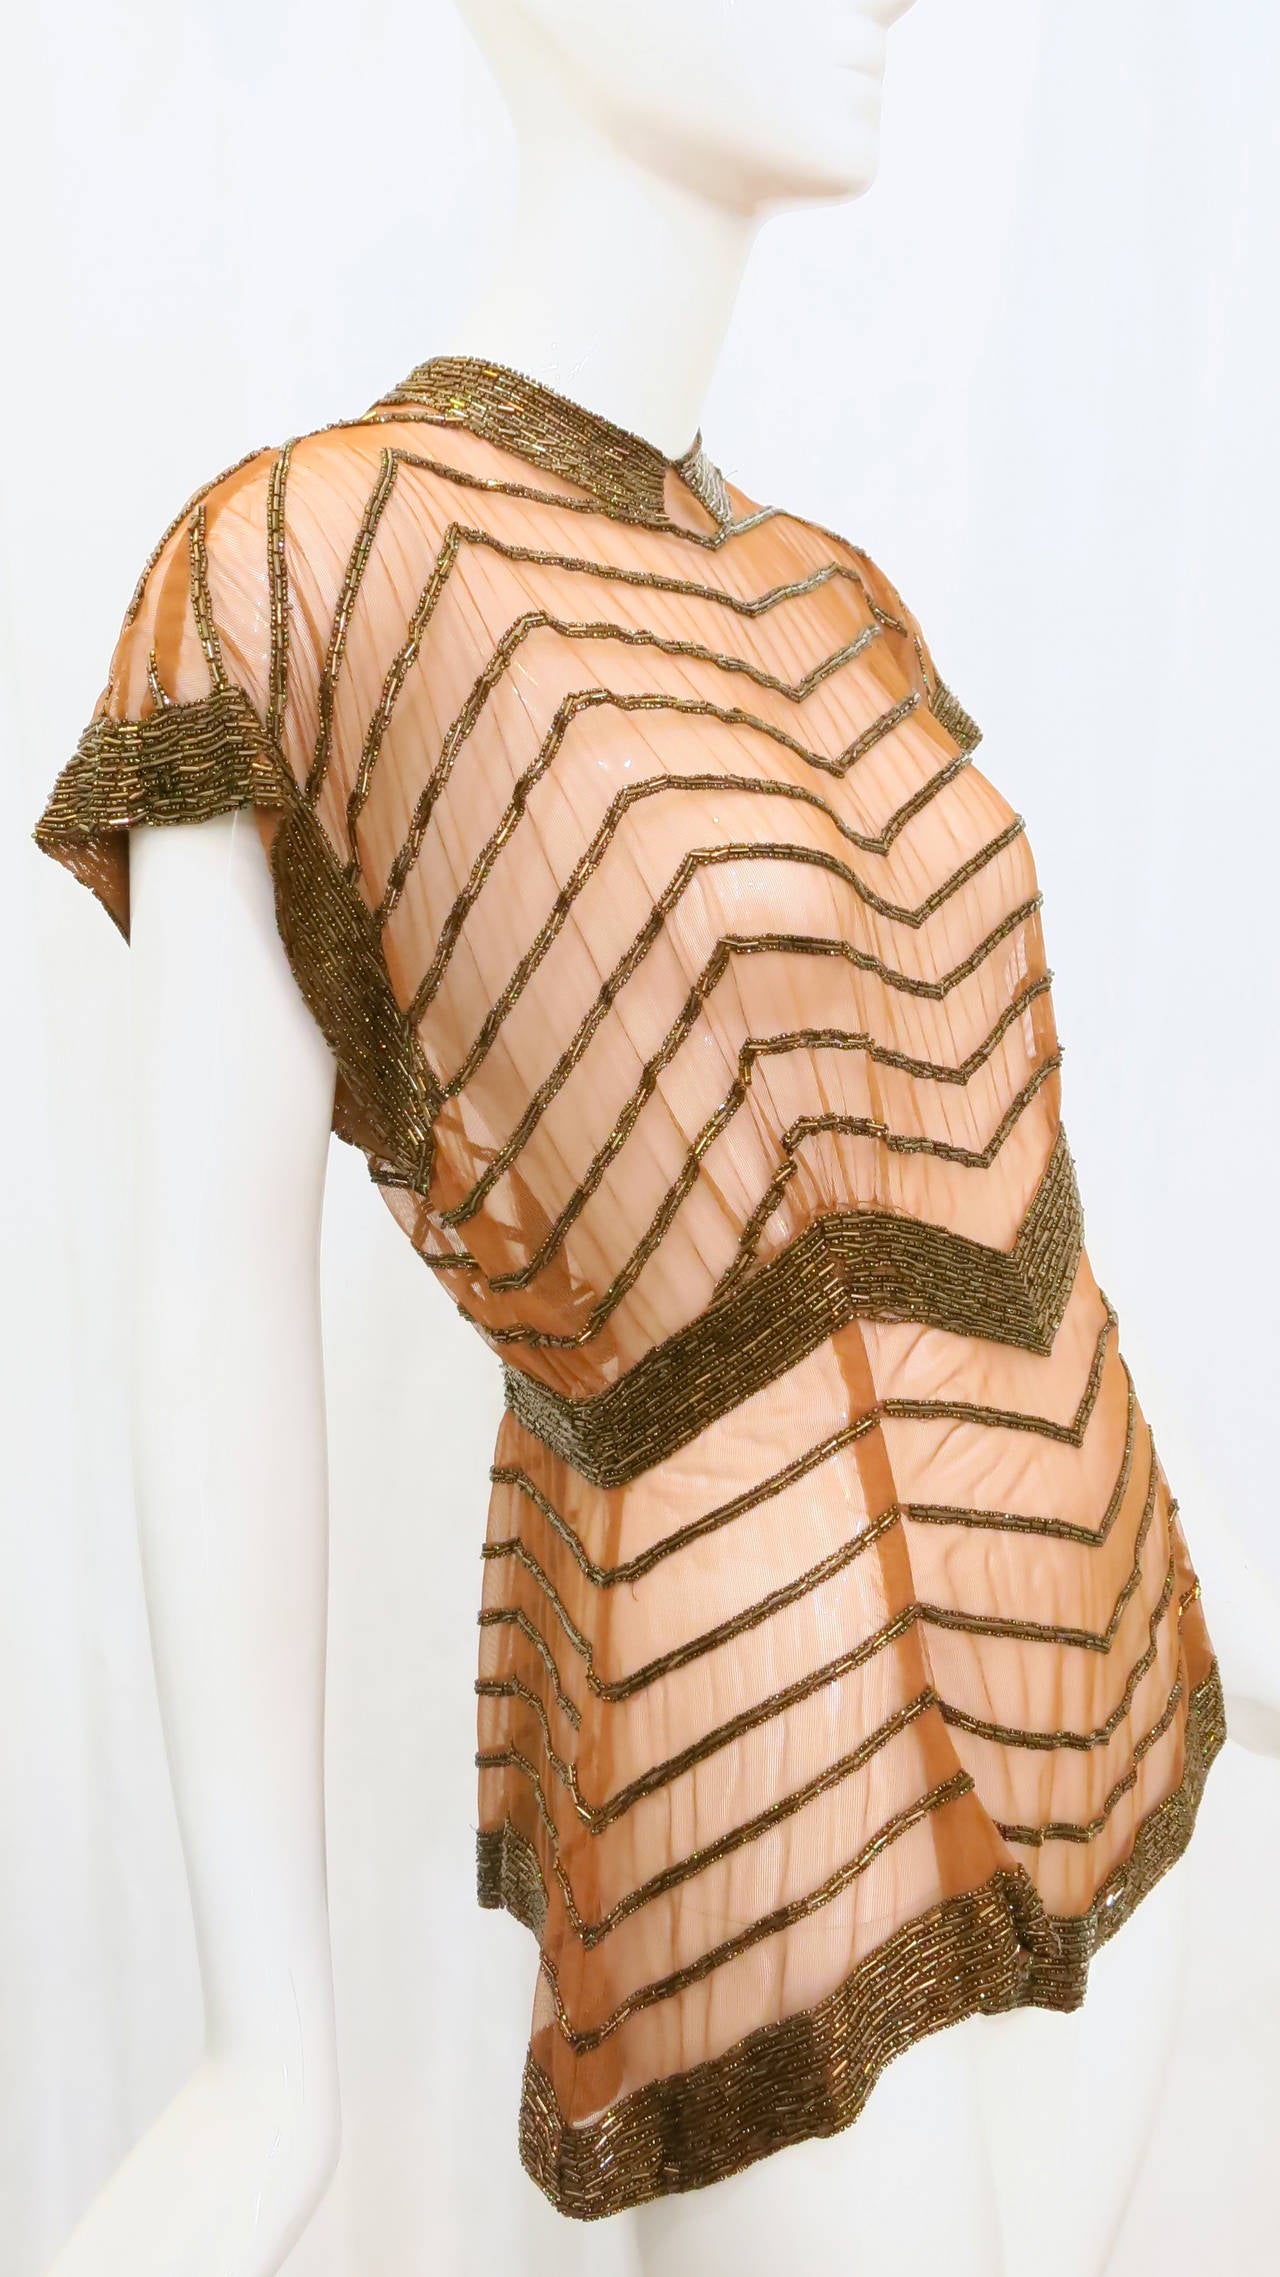 Women's 1930s Copper Mesh Beaded Top with Stylized Collar and Chevron Motif